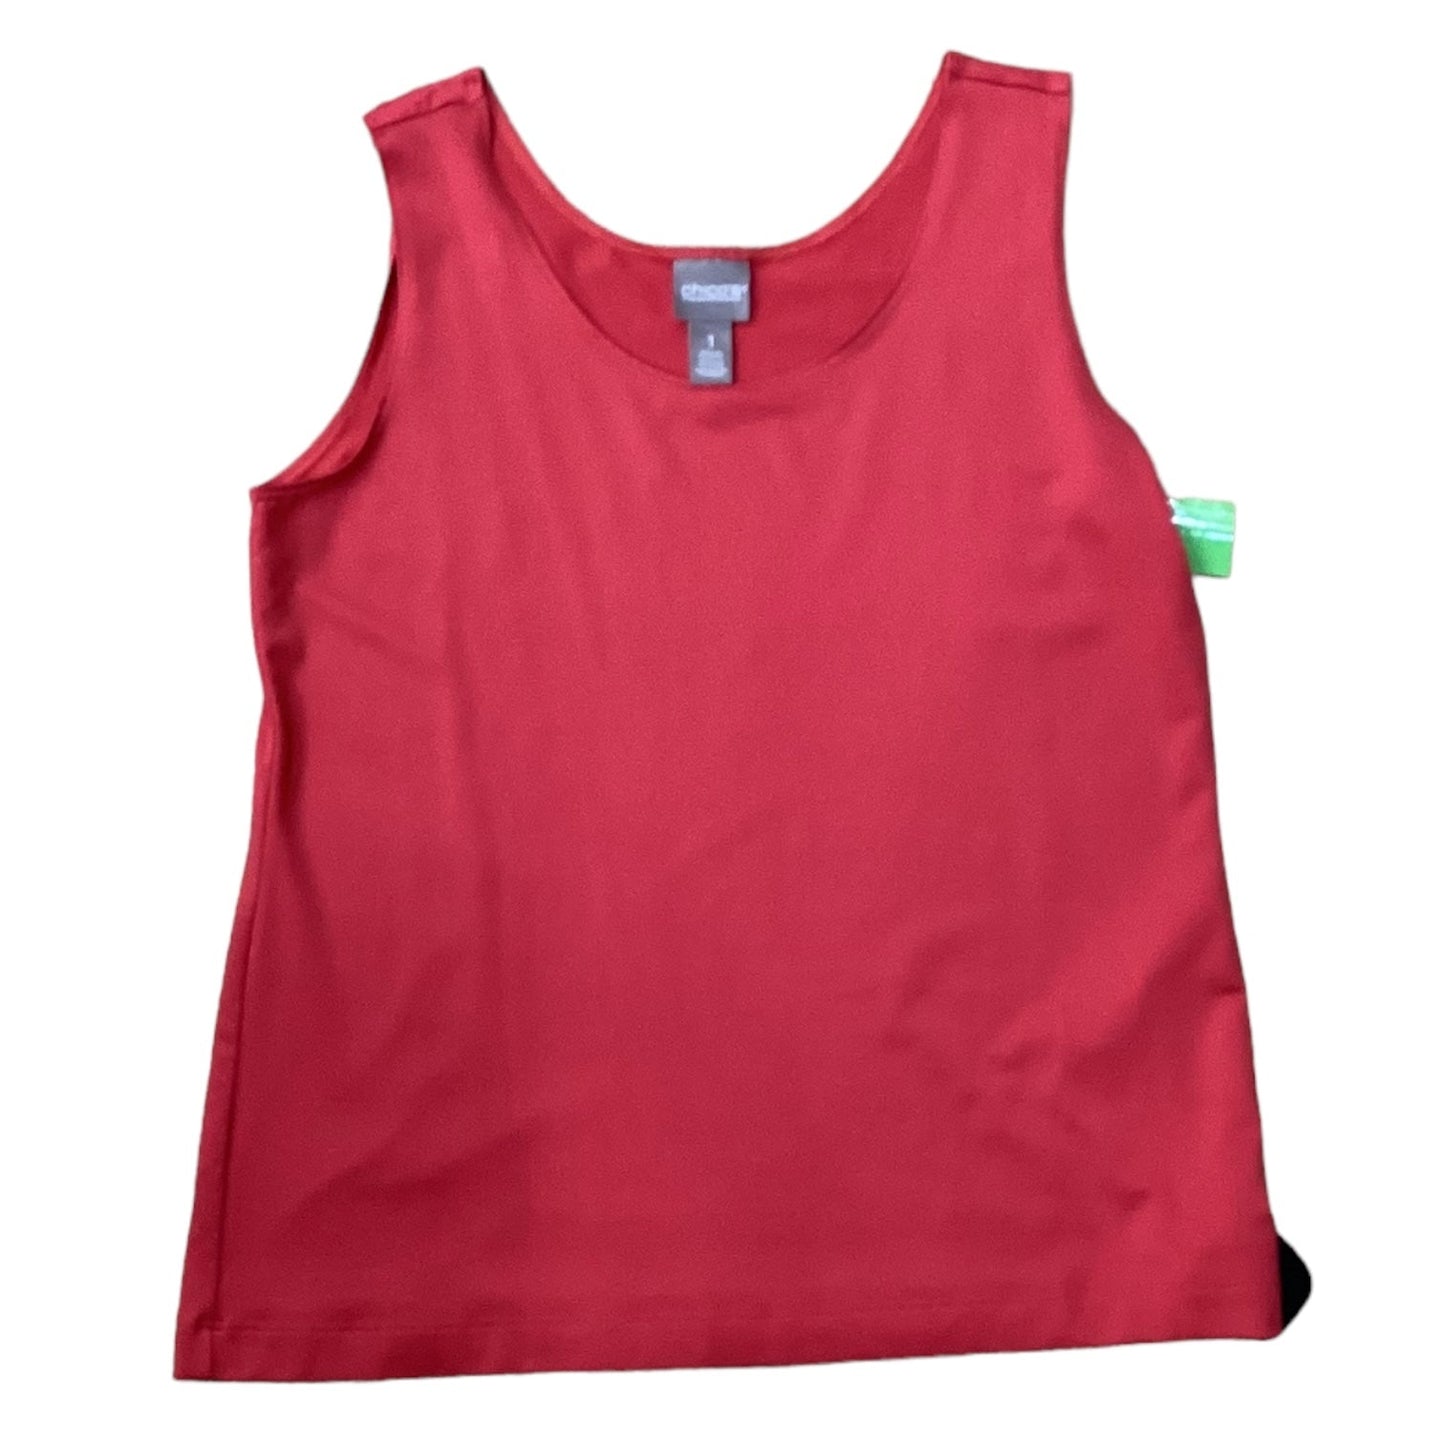 Red Top Sleeveless Chicos, Size 1